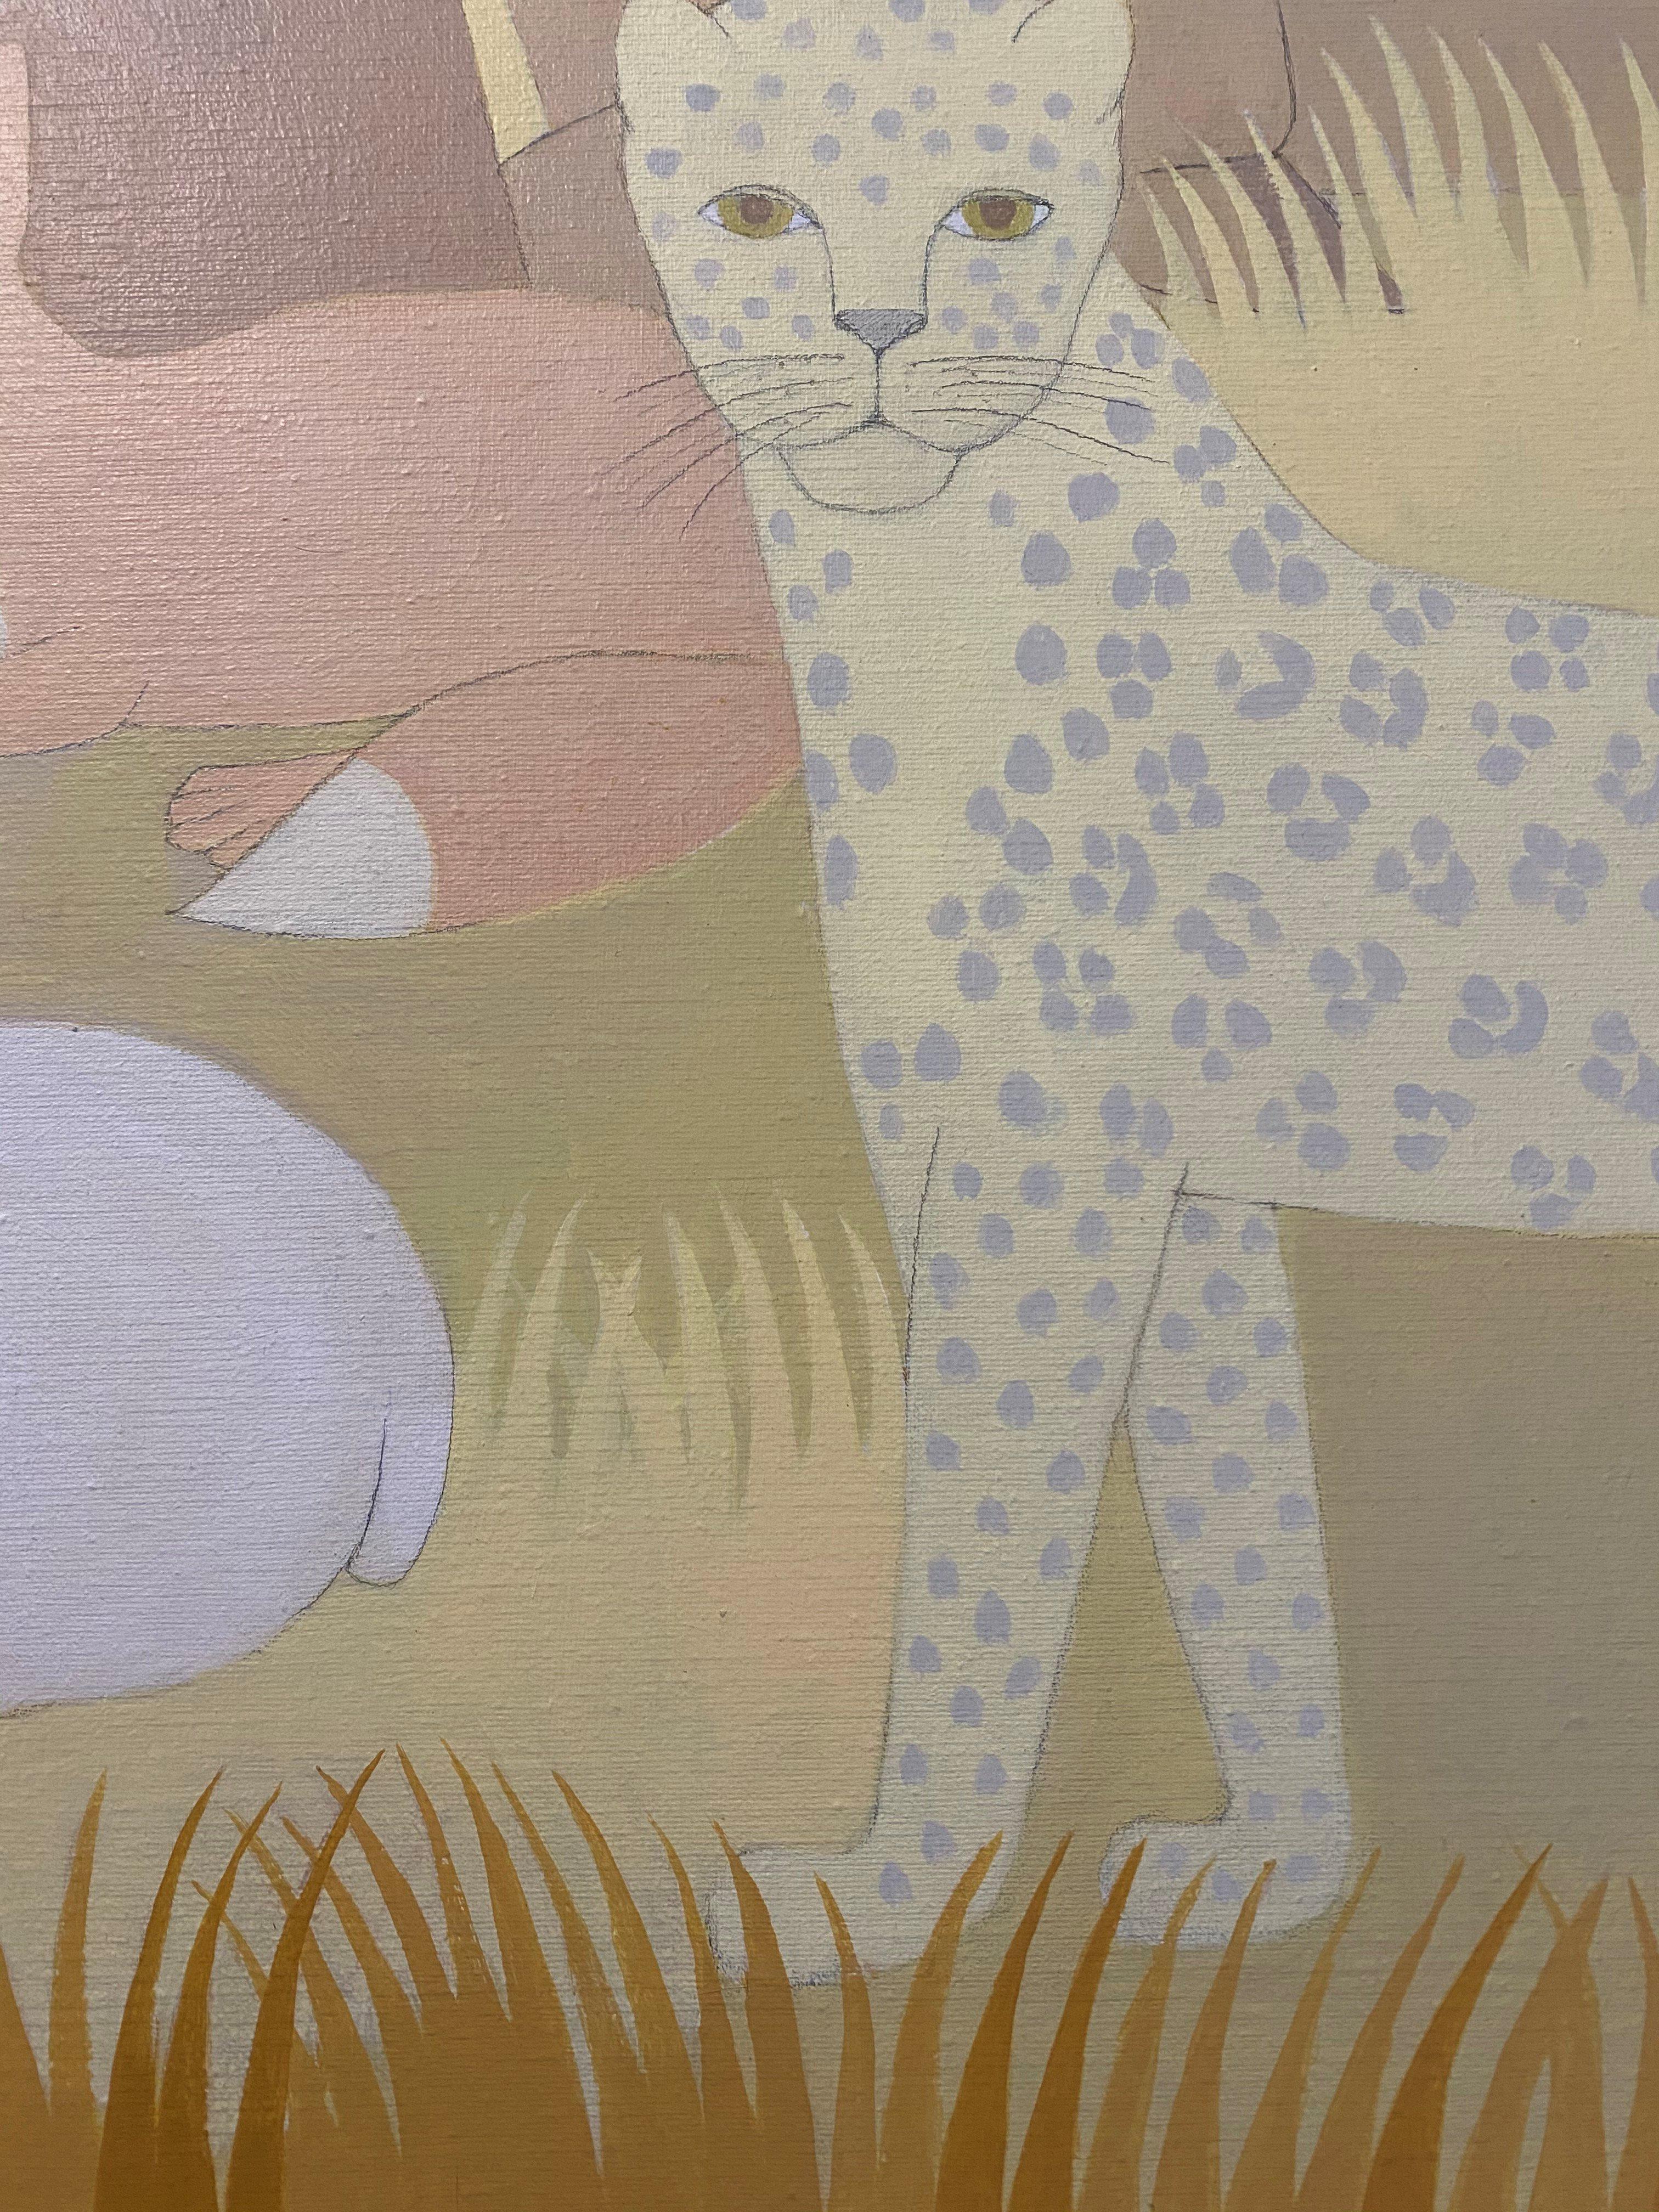 Rosamond Berg (1931 - 2018)
Peaceable Kingdom IV, 1974-76
Acrylic and graphite on canvas
42 x 60 inches
Signed lower right; signed, titled and dated on the reverse

This painting depicting a little girl amongst a cow, lion, fox, sheep, goat,